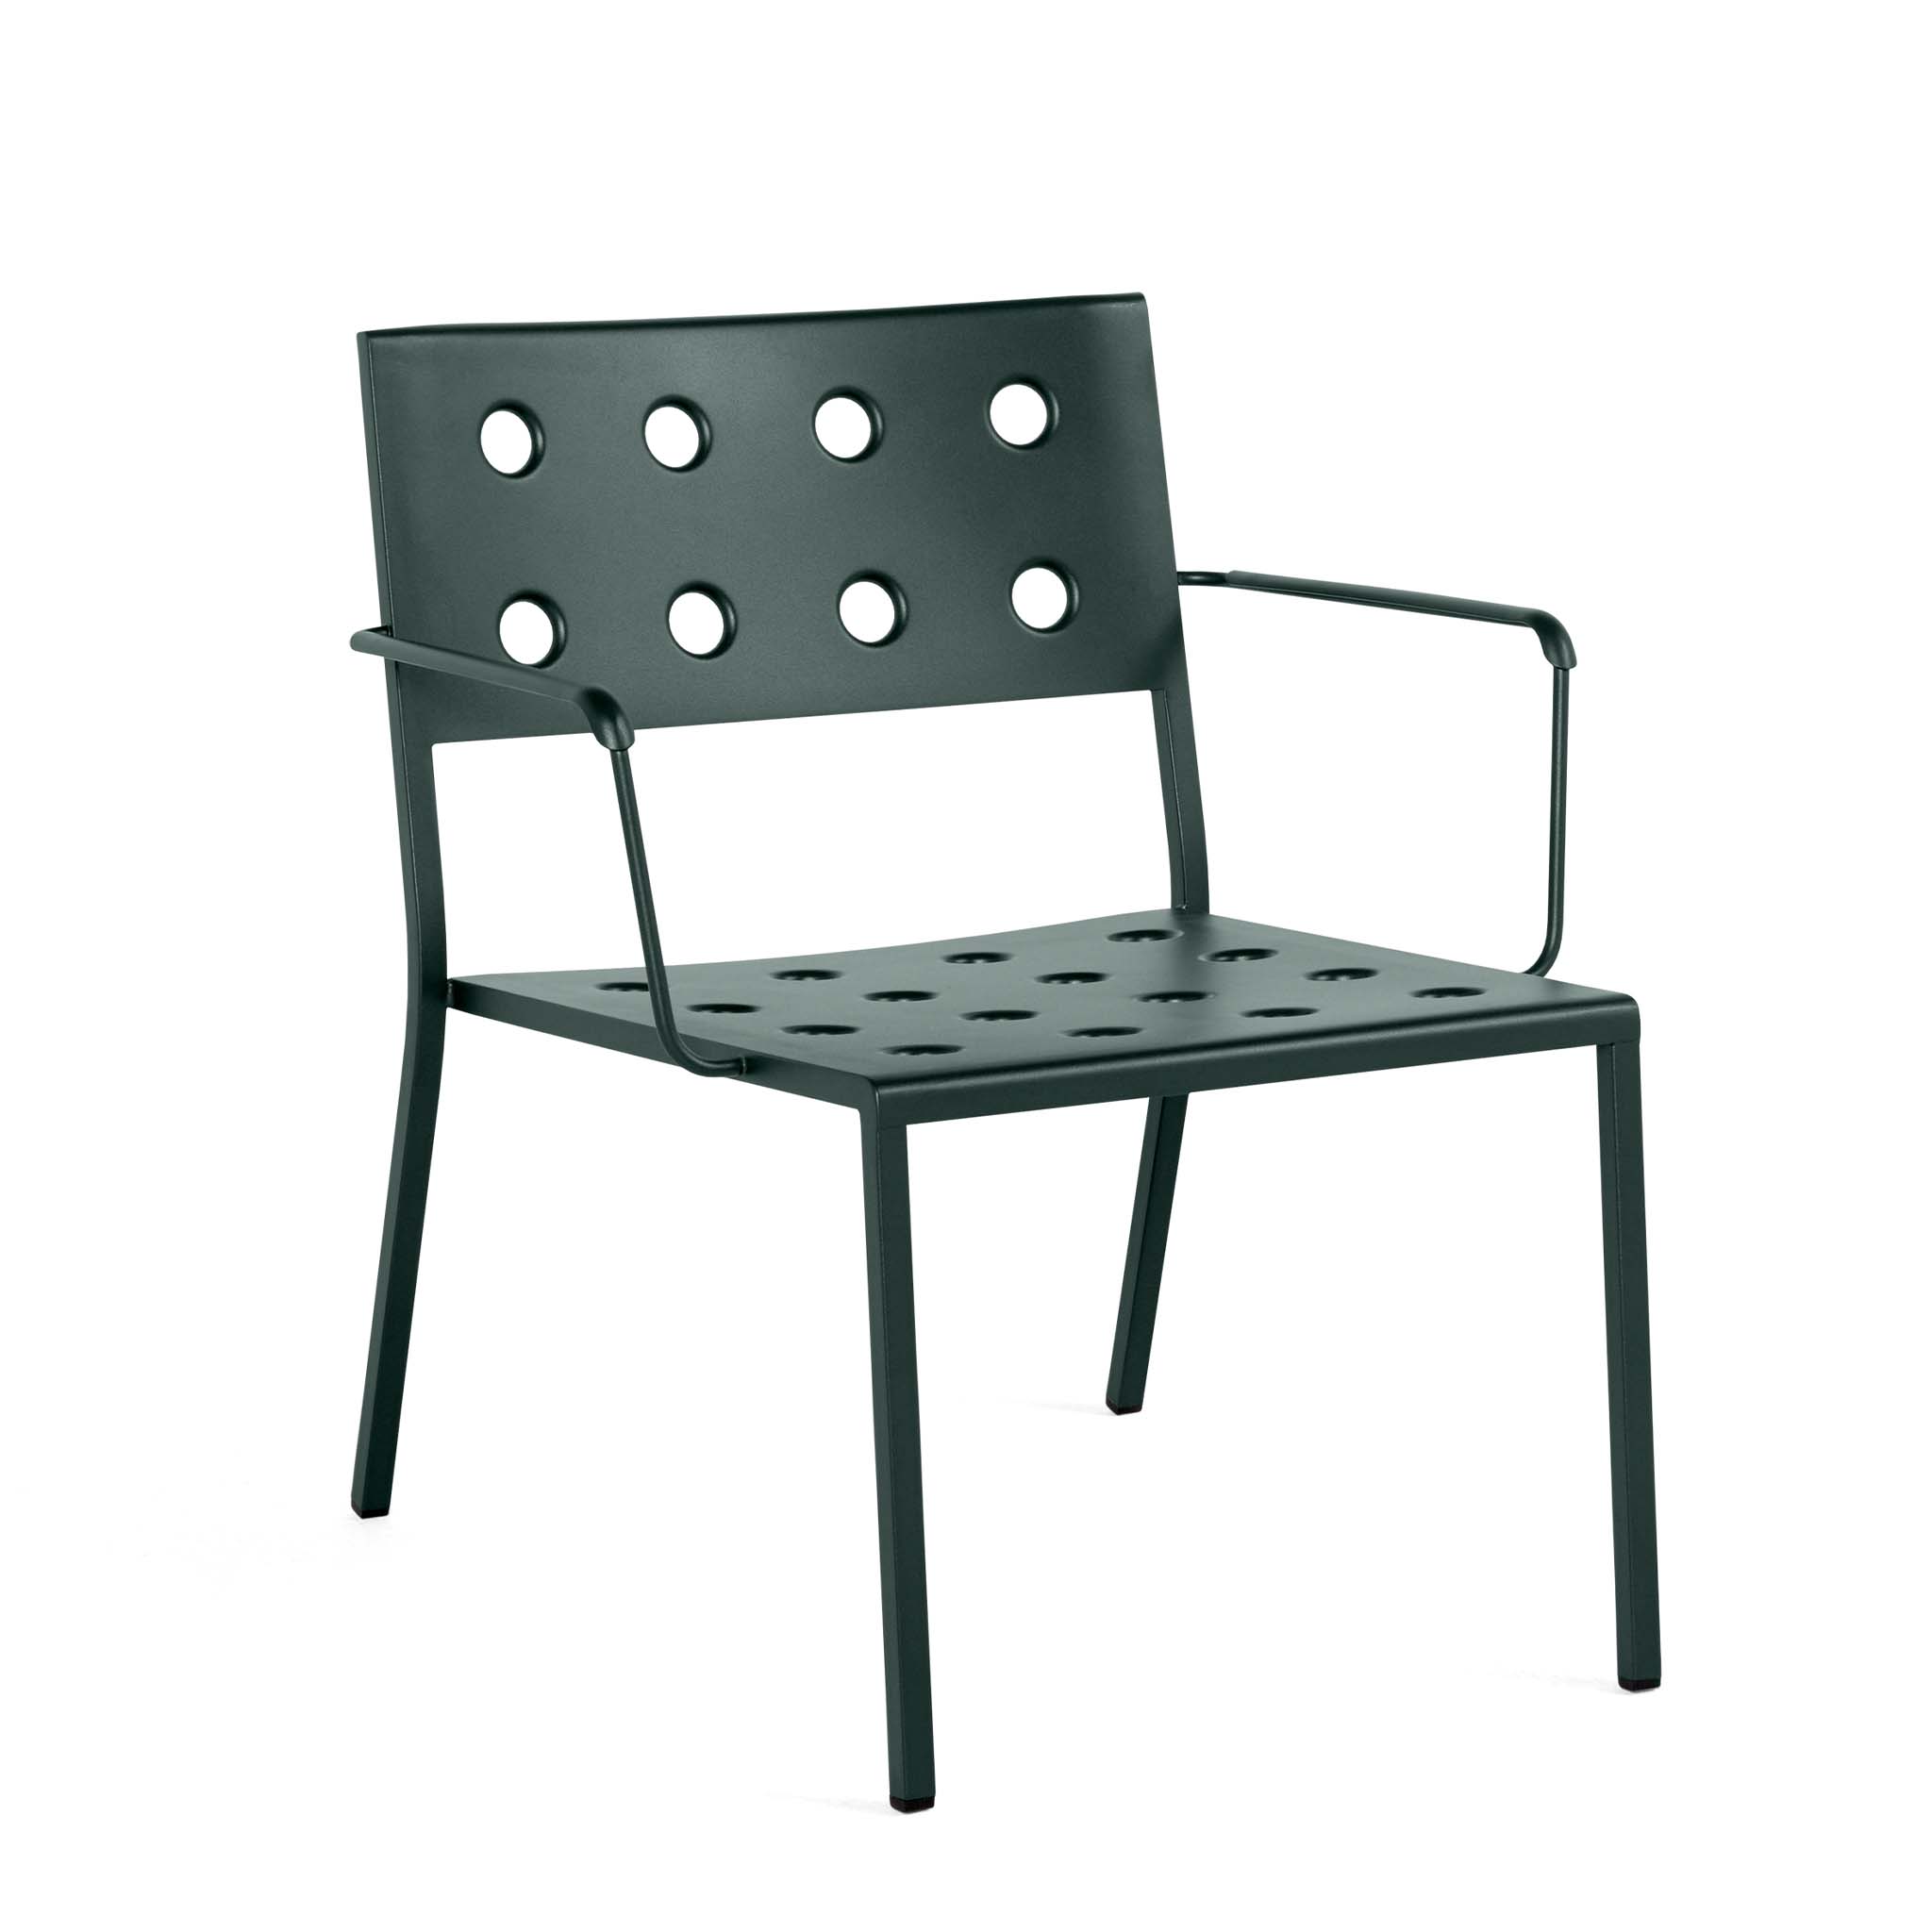 Clearance Balcony Lounge Armchair / Dark Forest Green By Ronan and Erwan Bouroullec for Hay